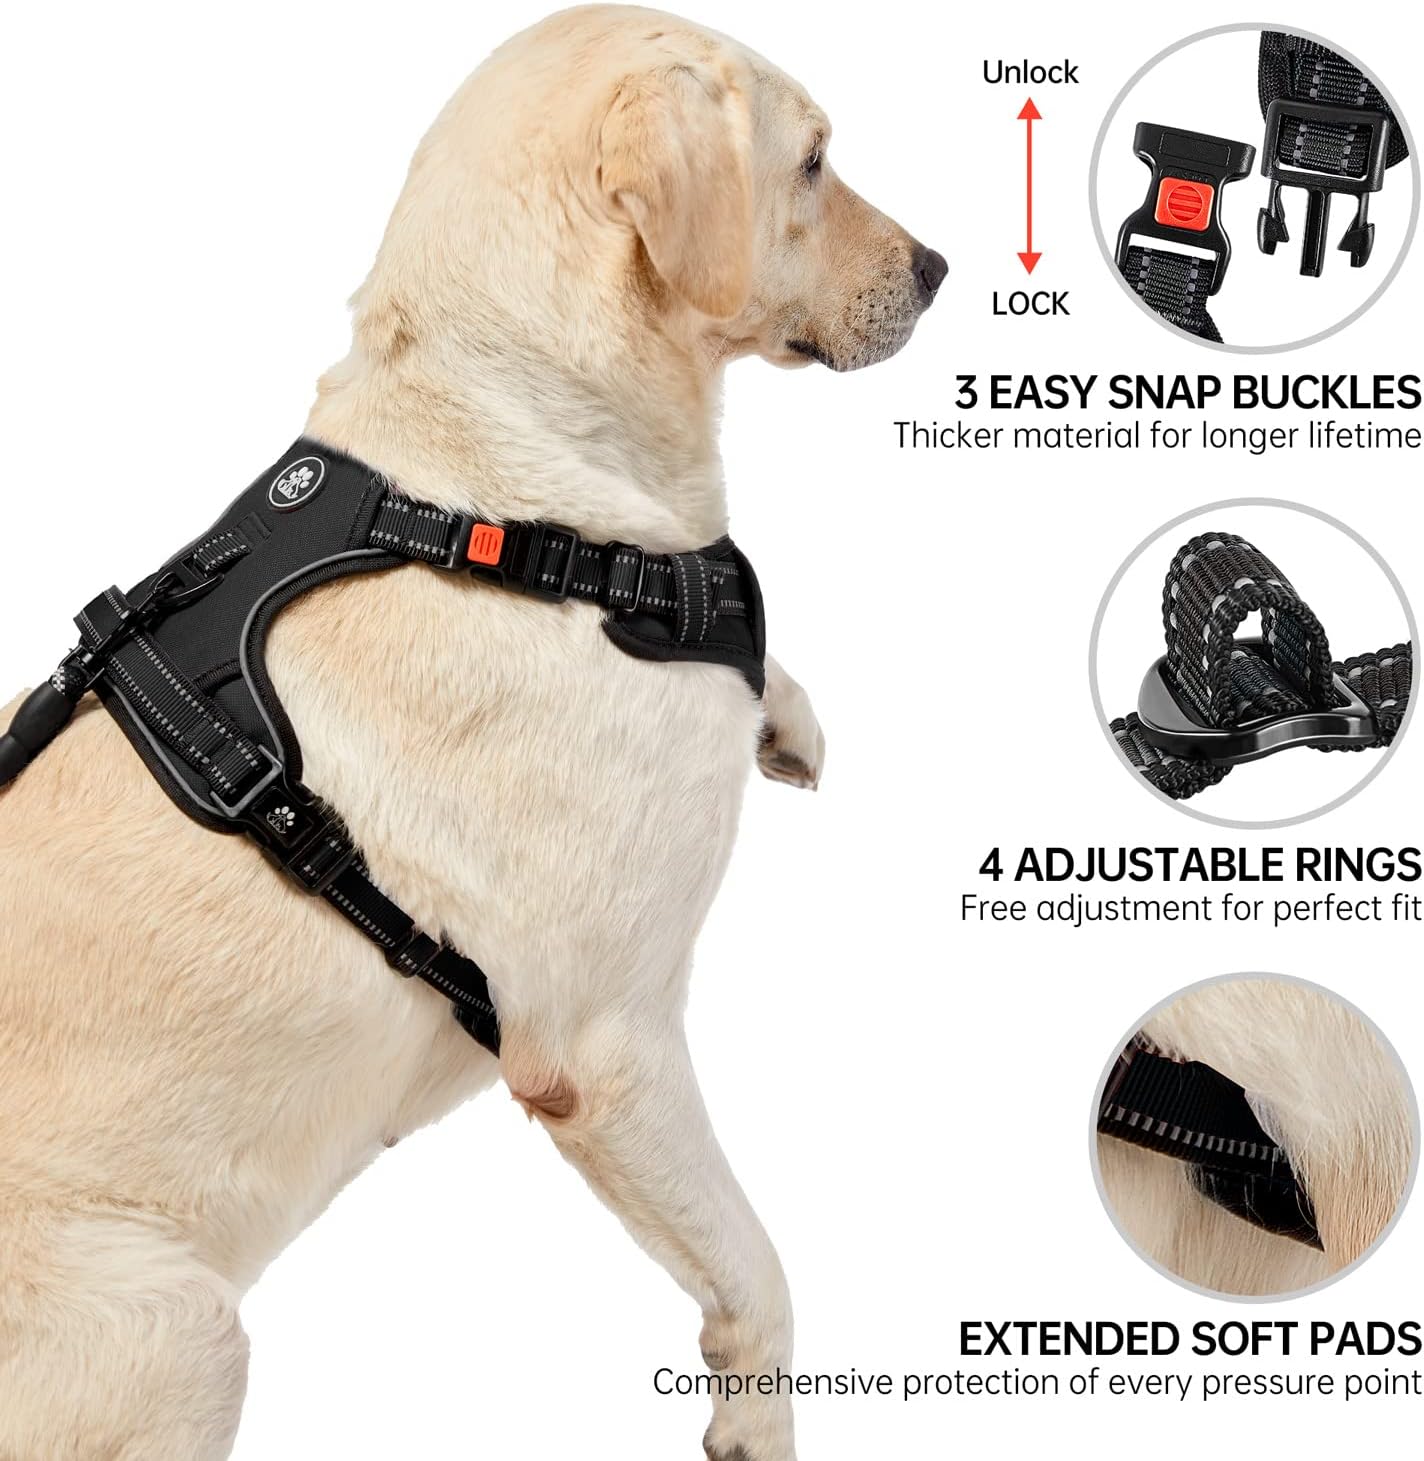 NESTROAD No Pull Dog Harness,Adjustable Oxford Dog Vest Harness with Leash,Reflective No-Choke Pet Harness with Easy Control Soft Handle for Small Medium Dogs(Medium,Blue)